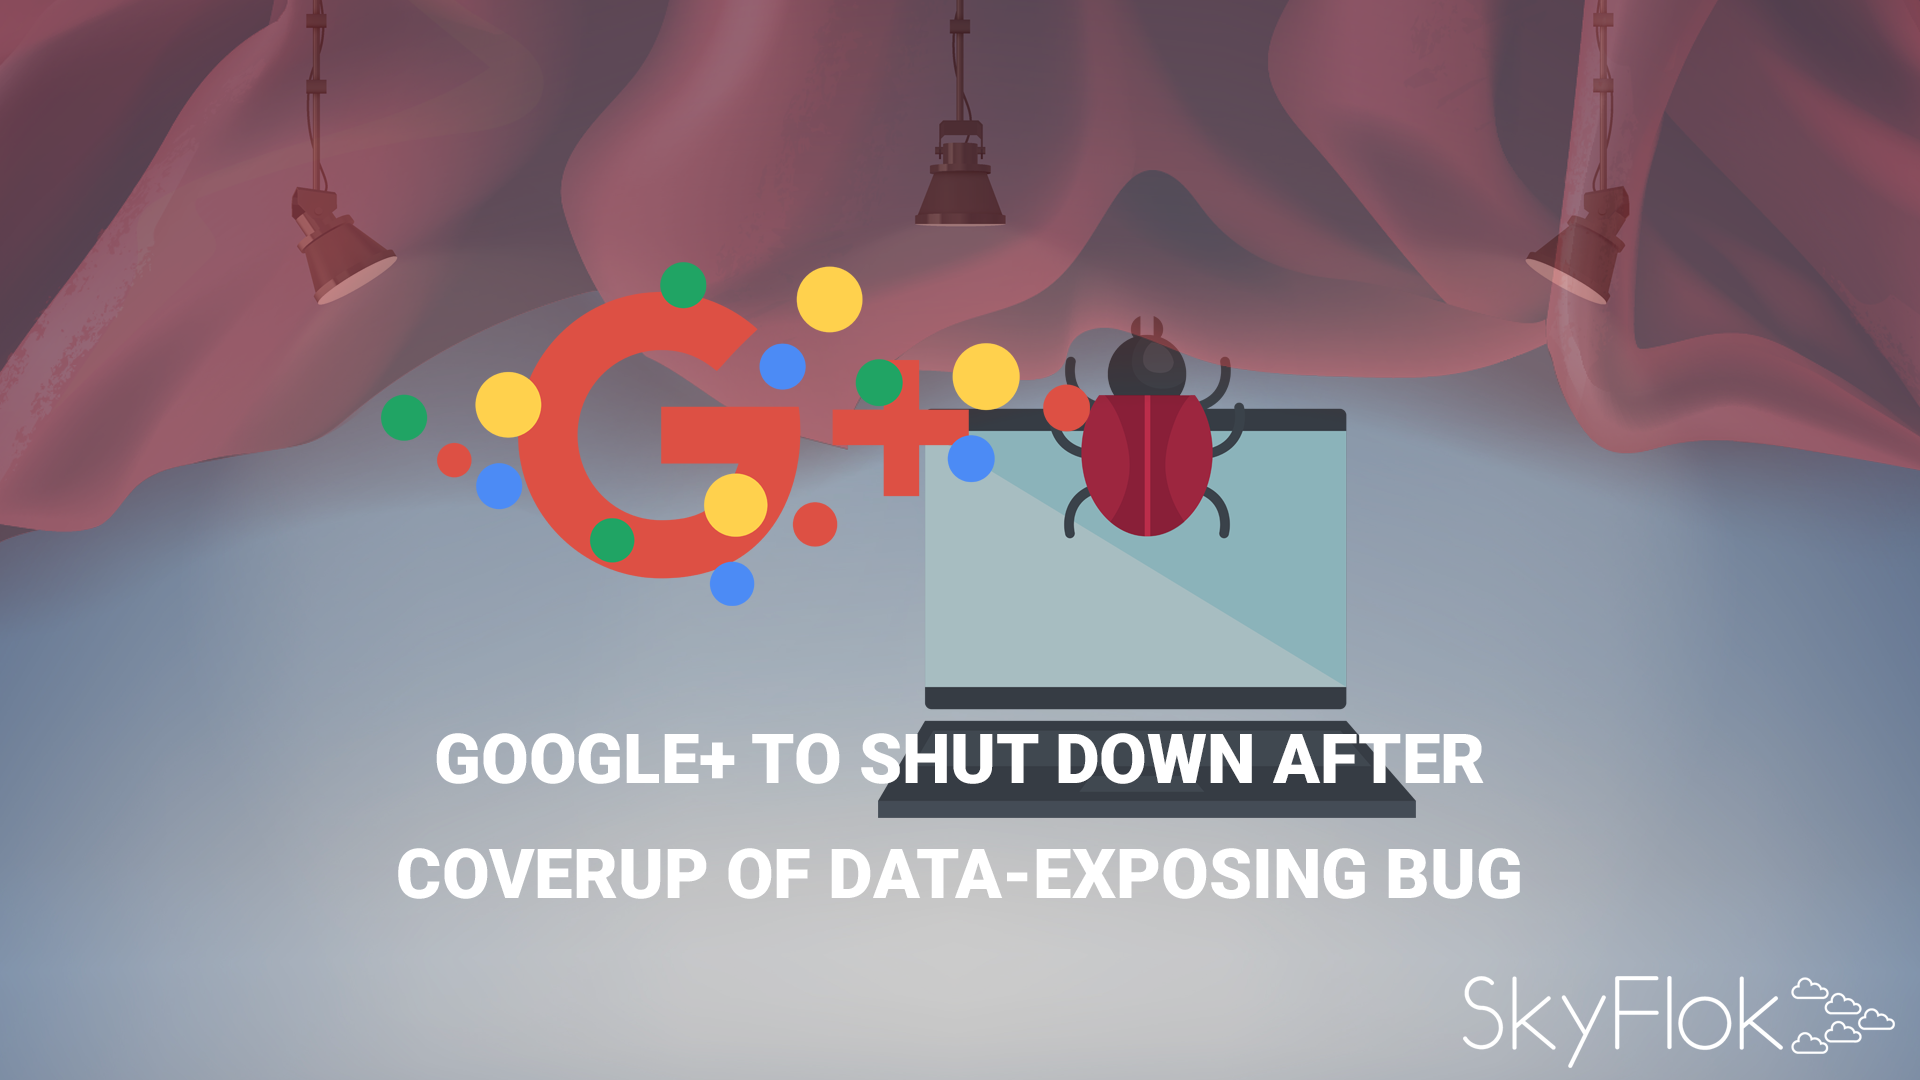 Google+ to shut down after coverup of data-exposing bug